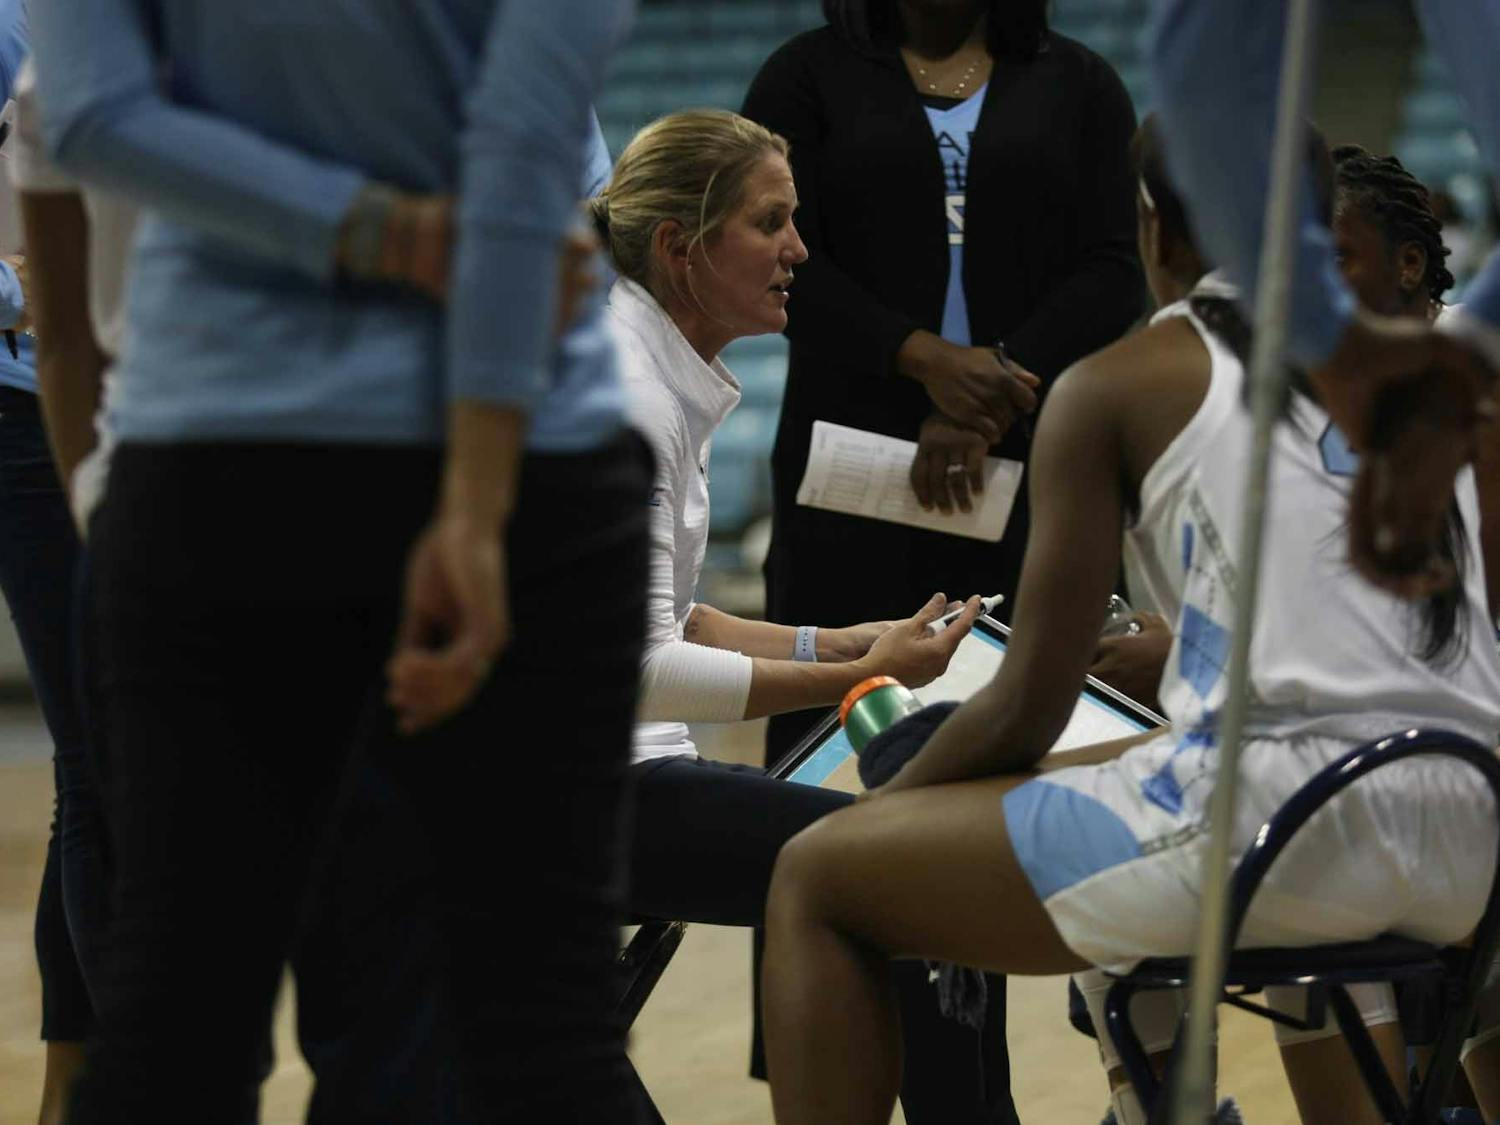 Head Coach Courtney Banghart talks to players during a time-out at exhibiton game against Wingate in the Charmichael Arena on Saturday, Nov. 2, 2019. UNC won 82-37.